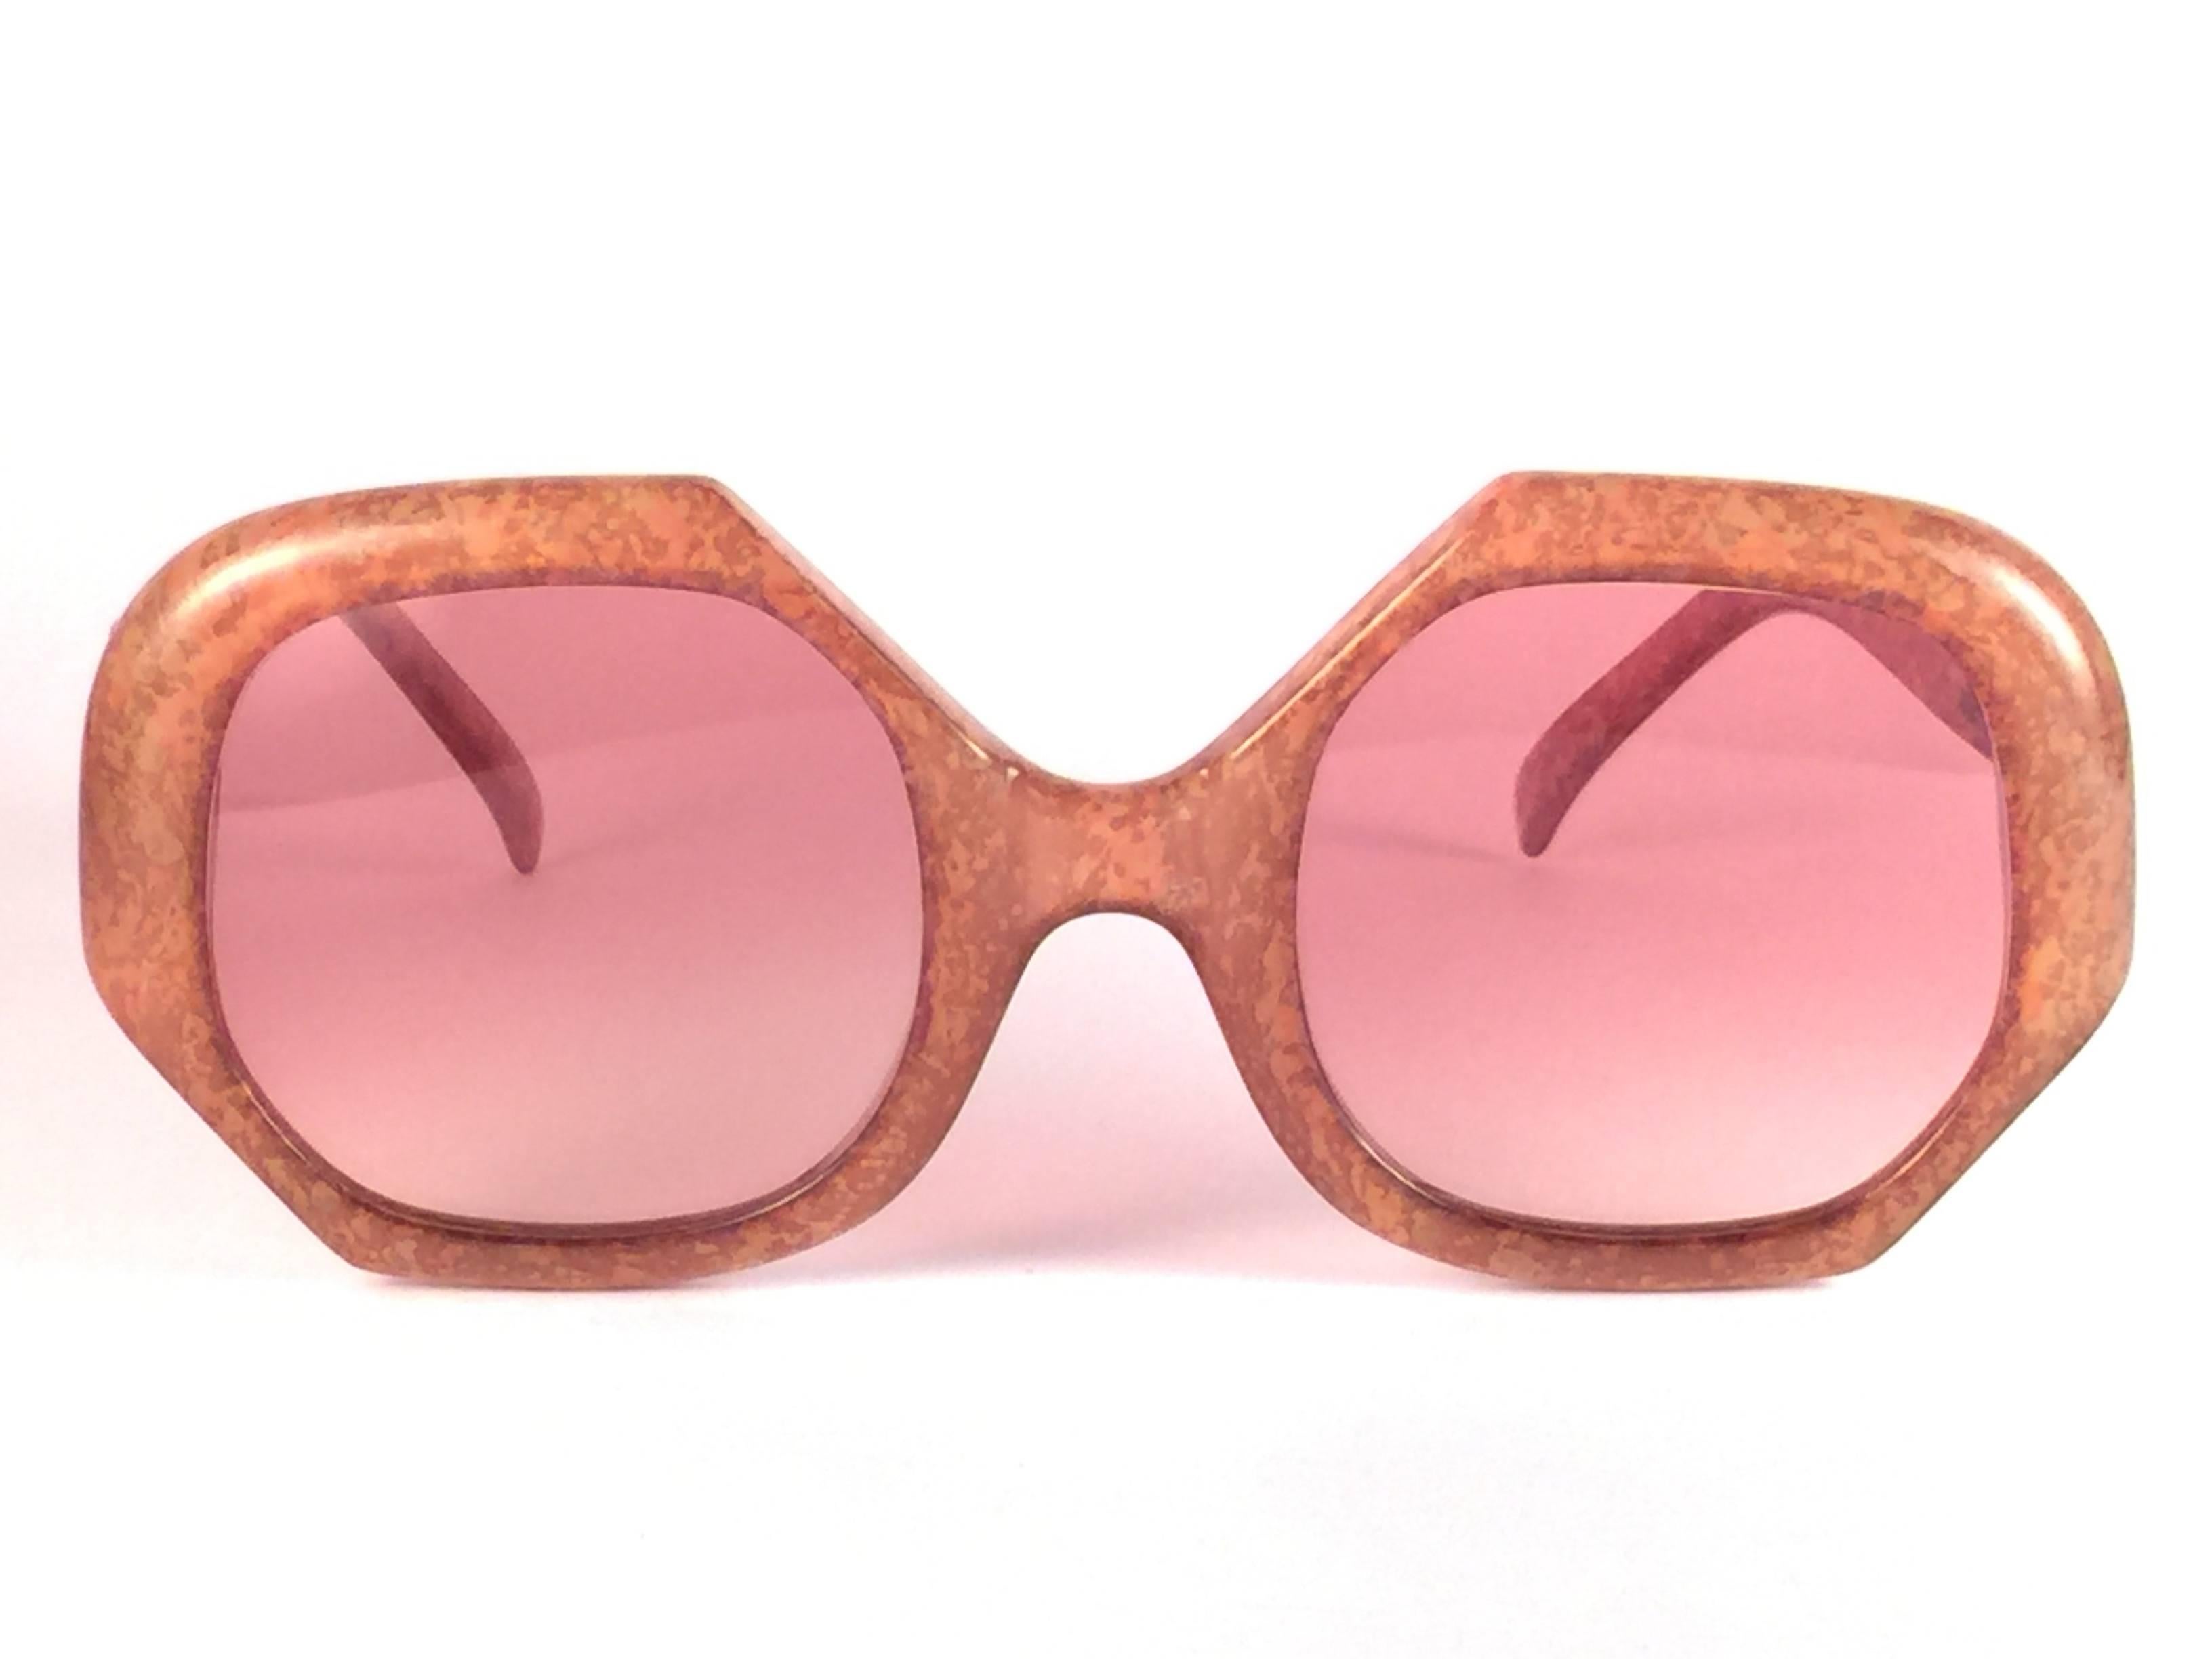 New Vintage Christian Dior 2031 30 Jasped brown frame with spotless light brown lenses.   
Made in Germany.  Produced and design in 1970's.  
A collector’s piece!  New, never worn or displayed. 
Comes with its original silver Christian Dior Lunettes